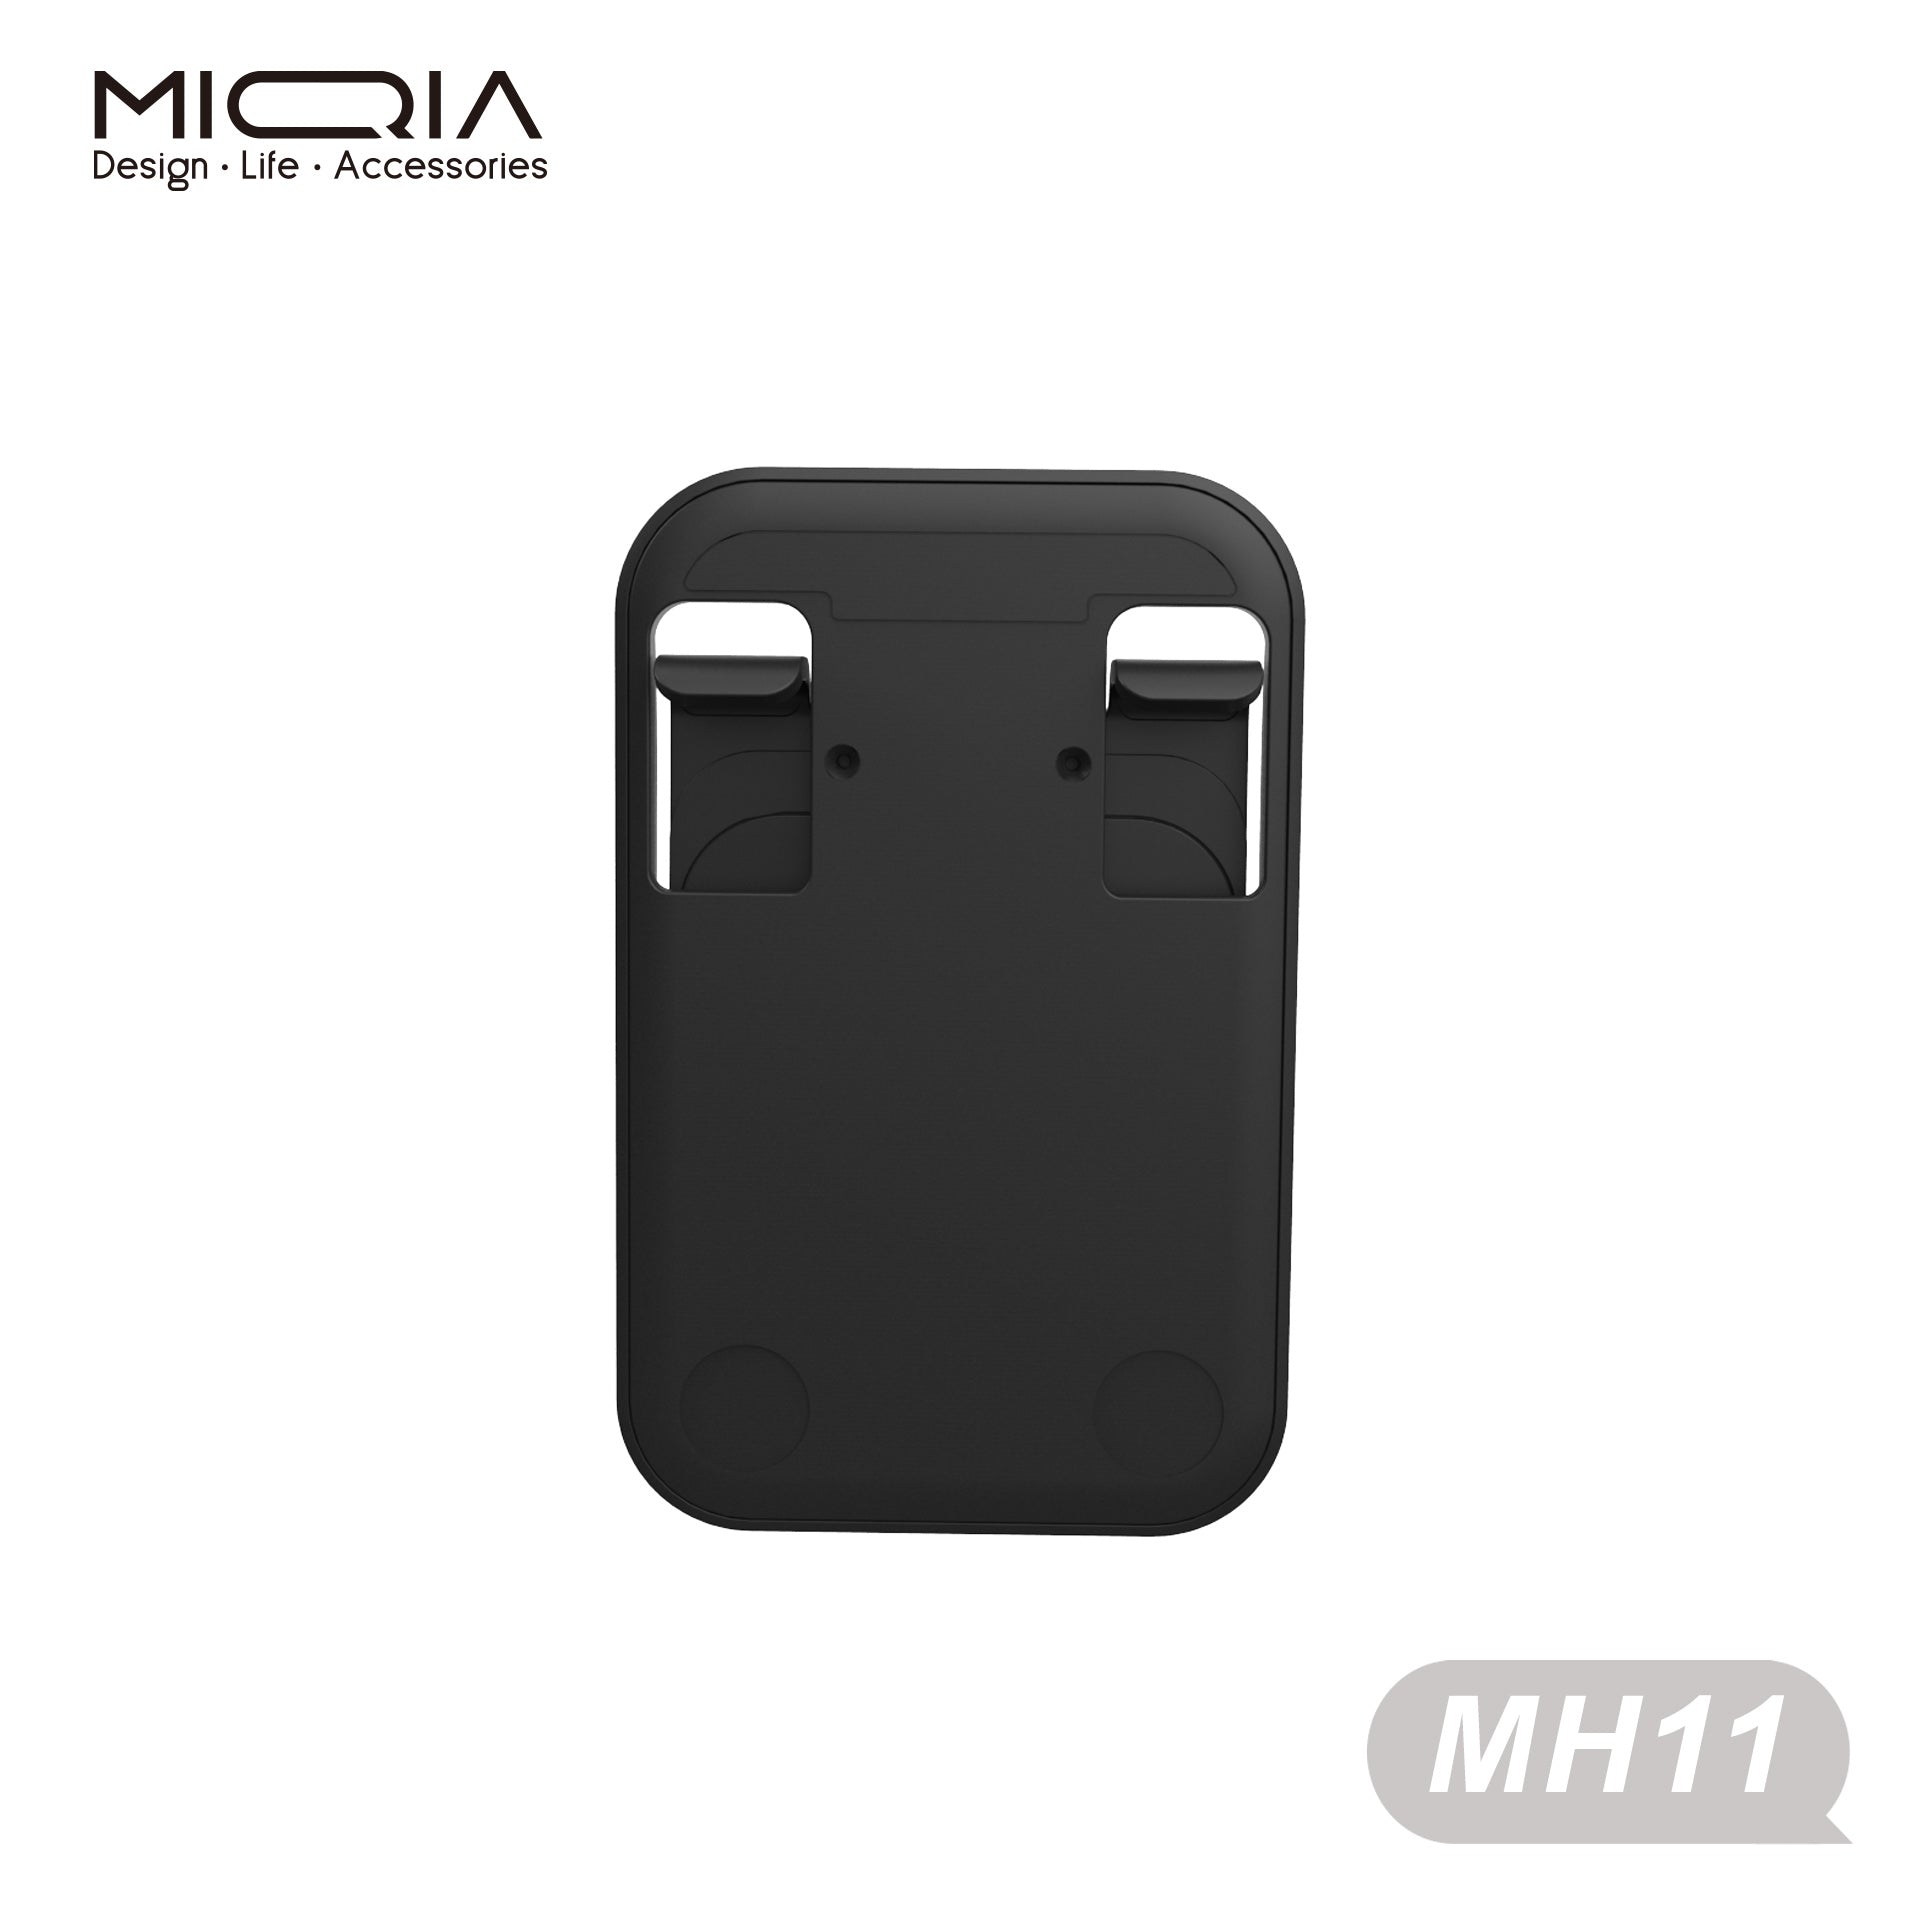 MIQIA MH11 Phone Holder for Desk